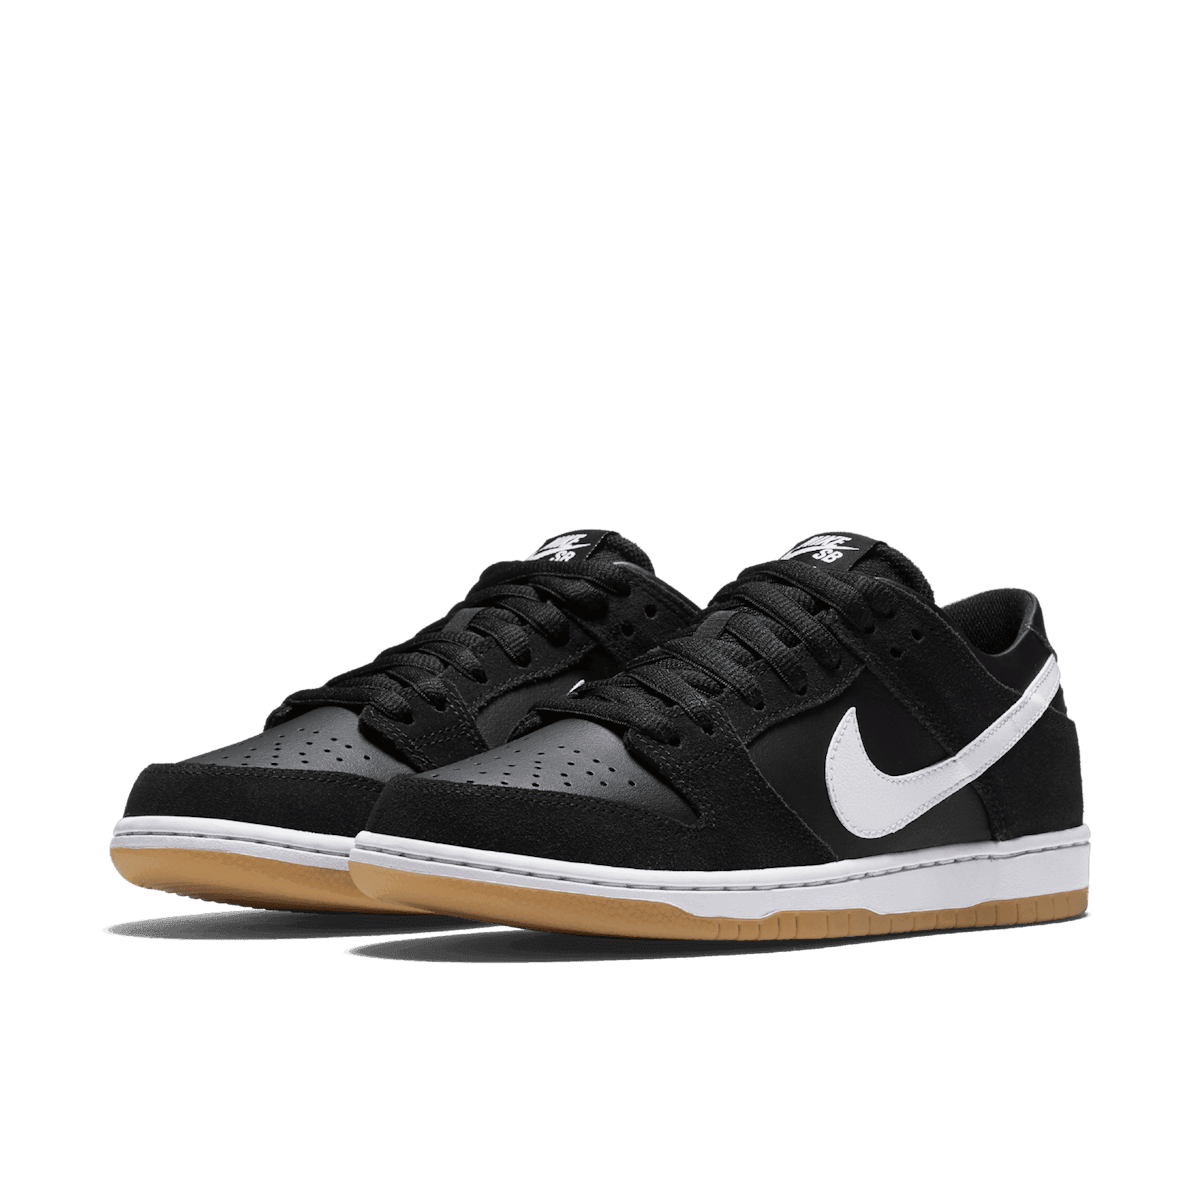 Nike SB Dunk Low Black White Gum - 854866-019 Raffles and Release Date